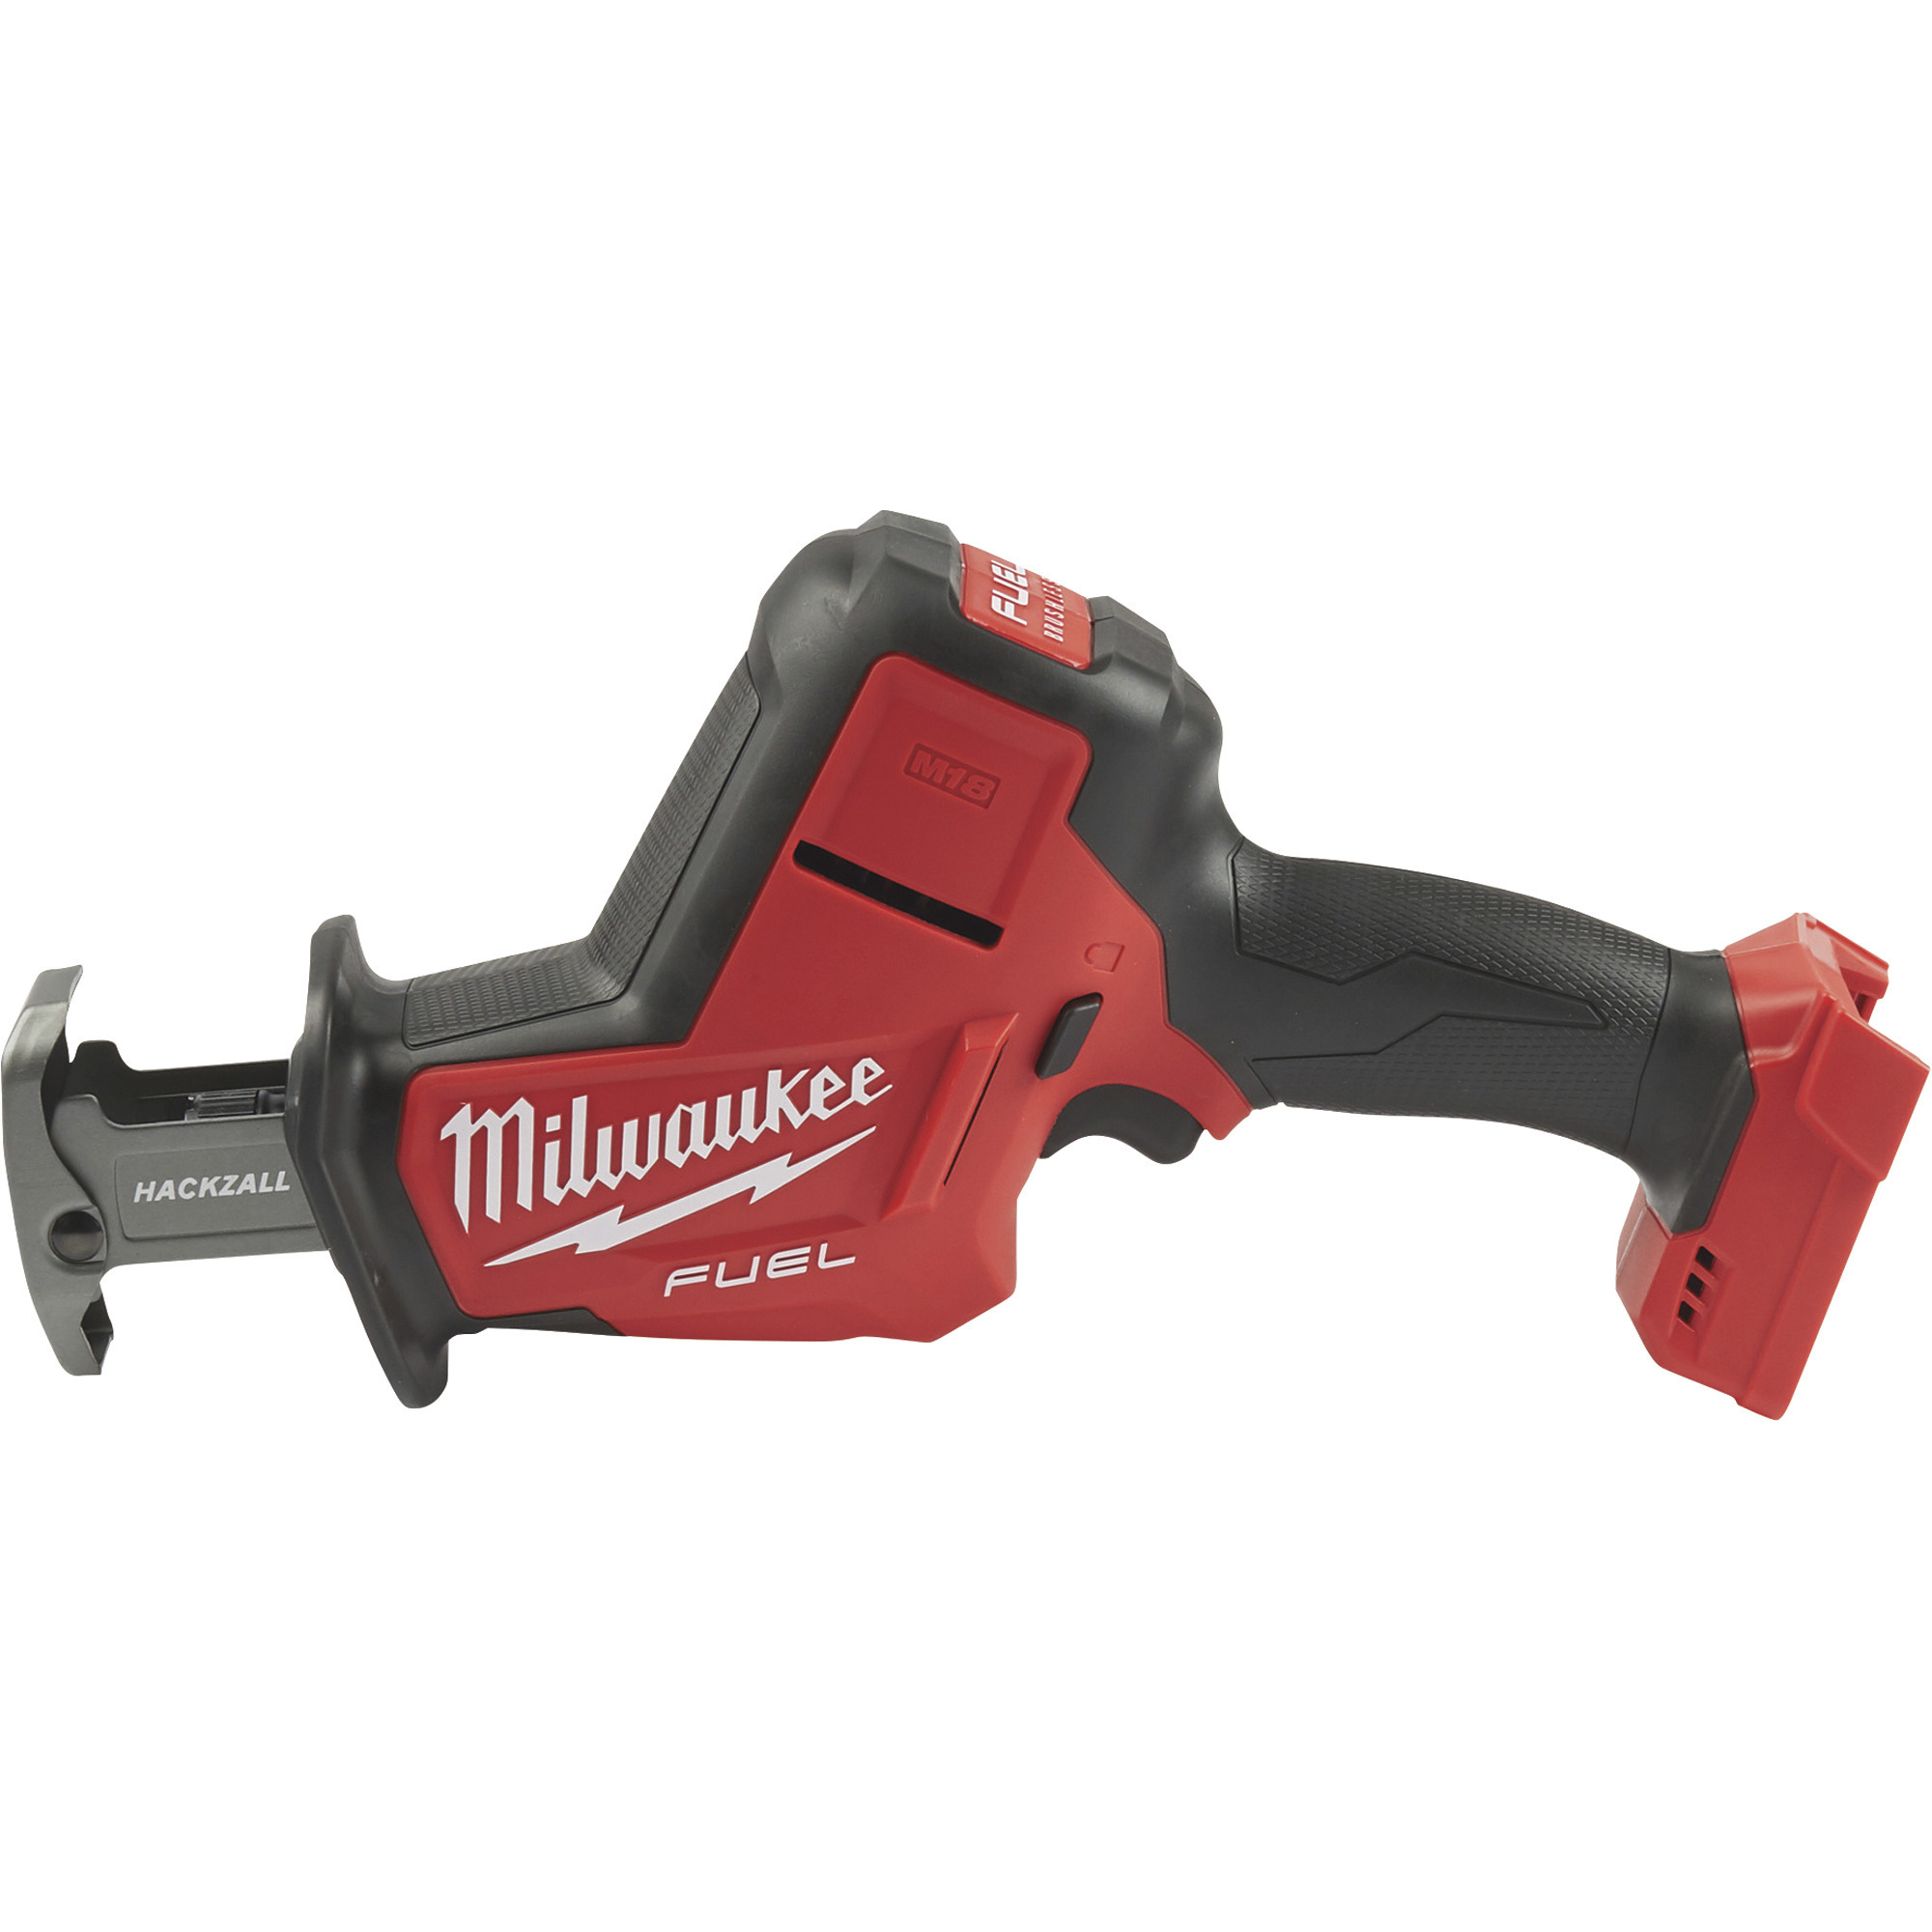 Milwaukee M18 Fuel Hackzall Reciprocating Saw, Tool Only, Model 2719-20